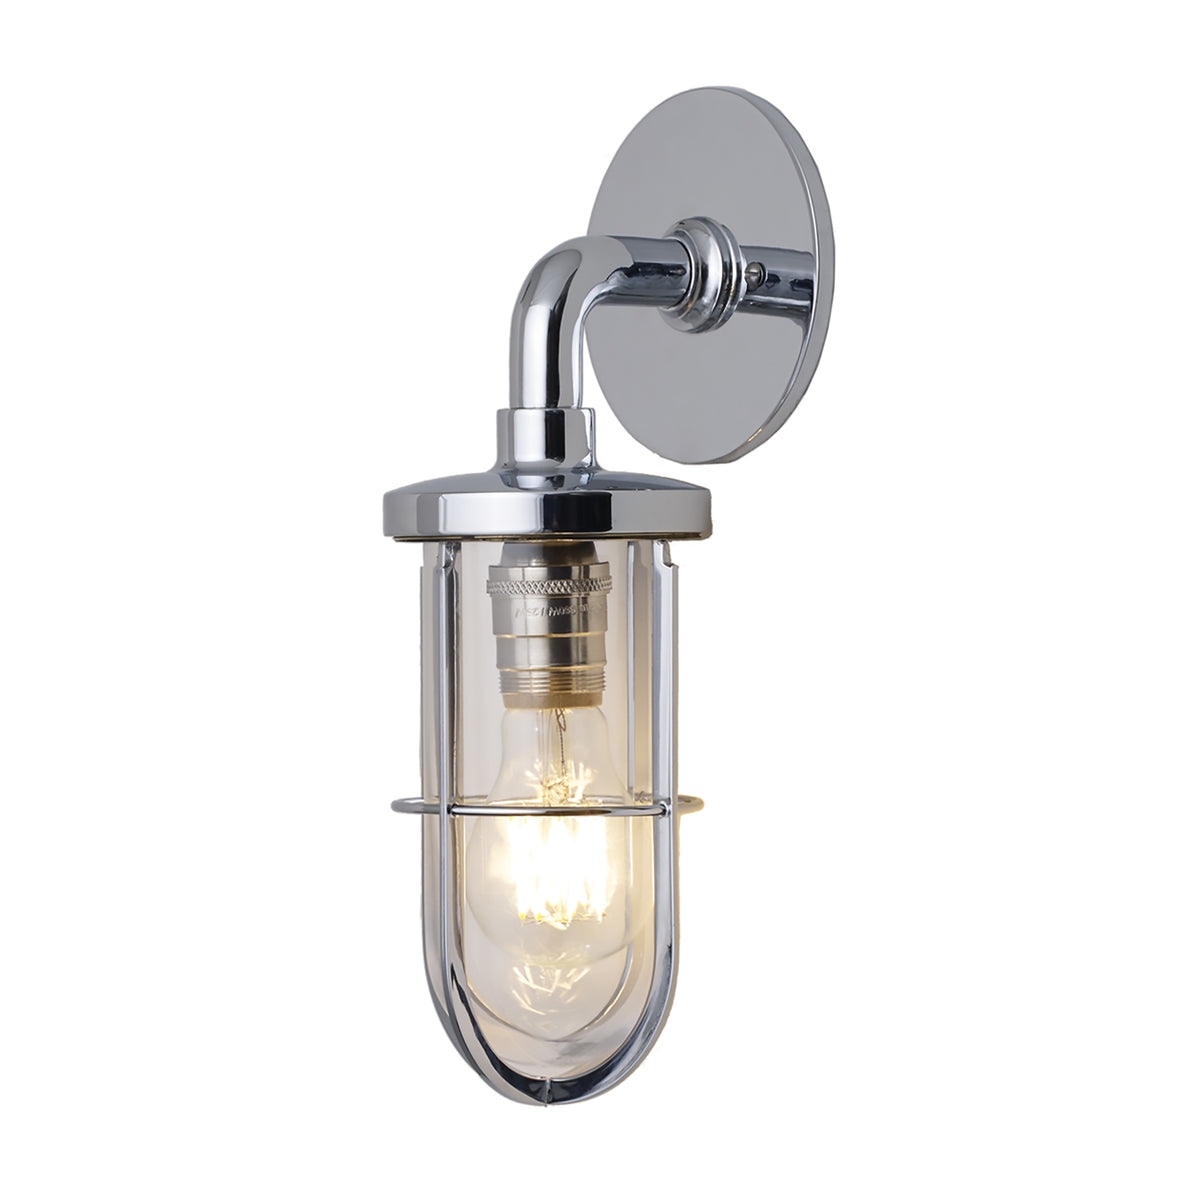 Original BTC, Weatherproof Ship's Well Glass Wall Light, Polished Brass Frosted, Exterior,